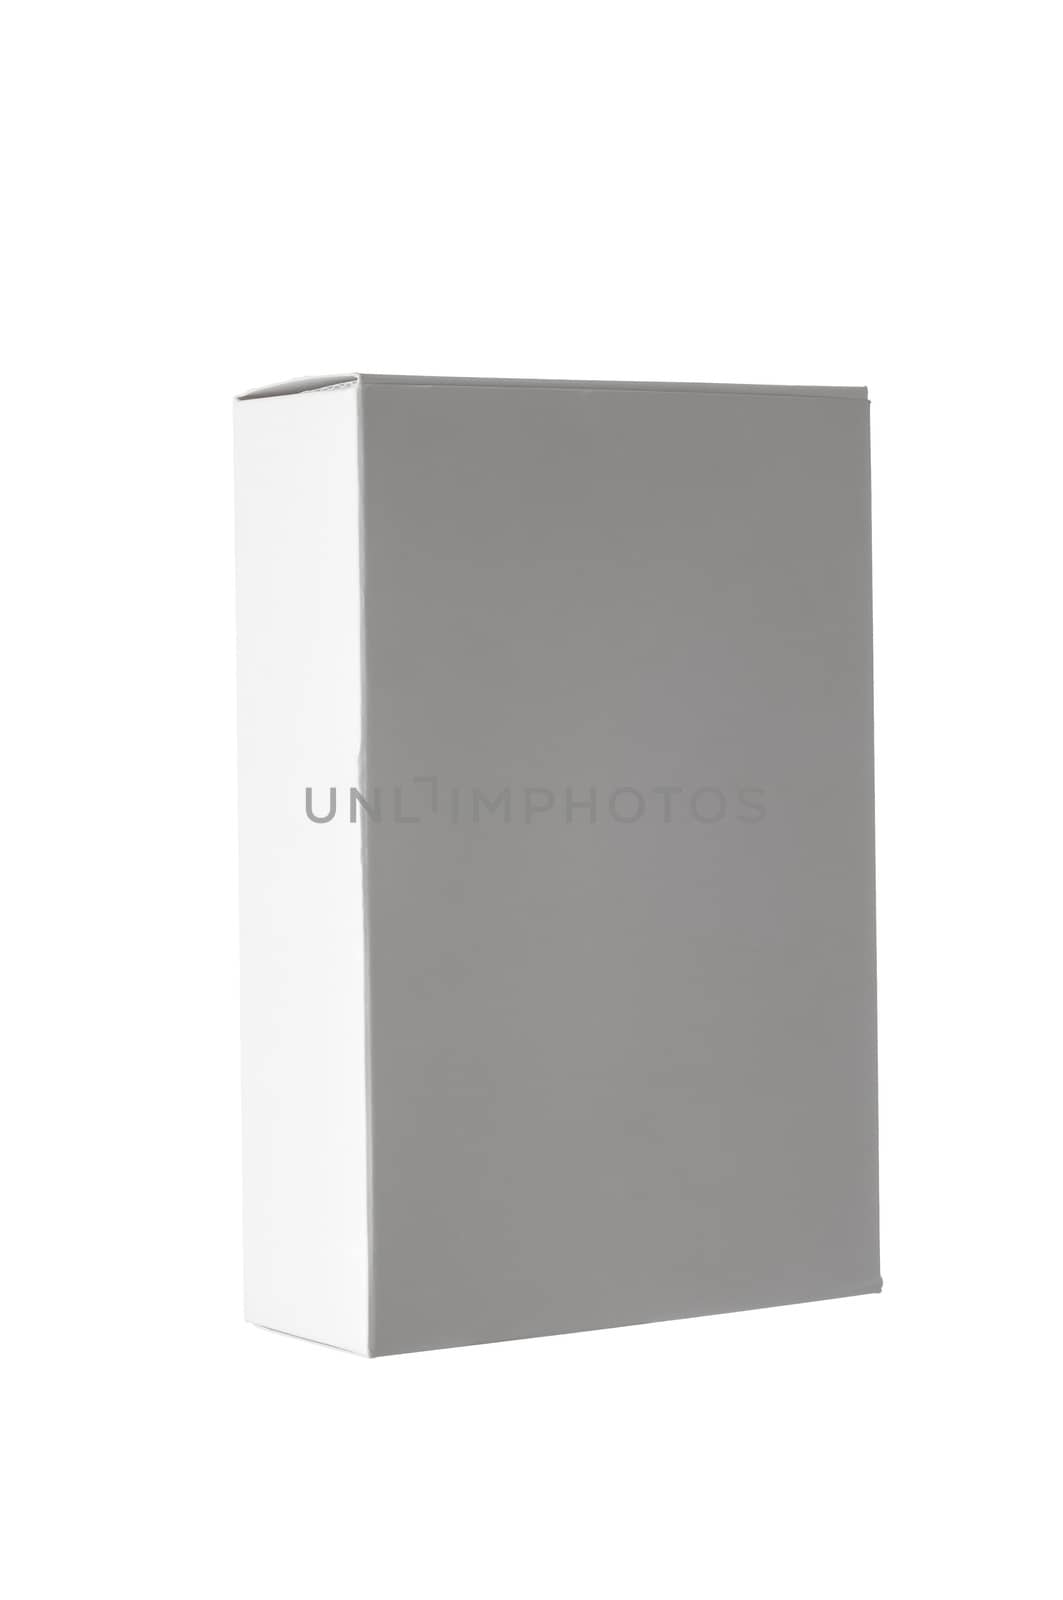 A simple white box isolated on white background